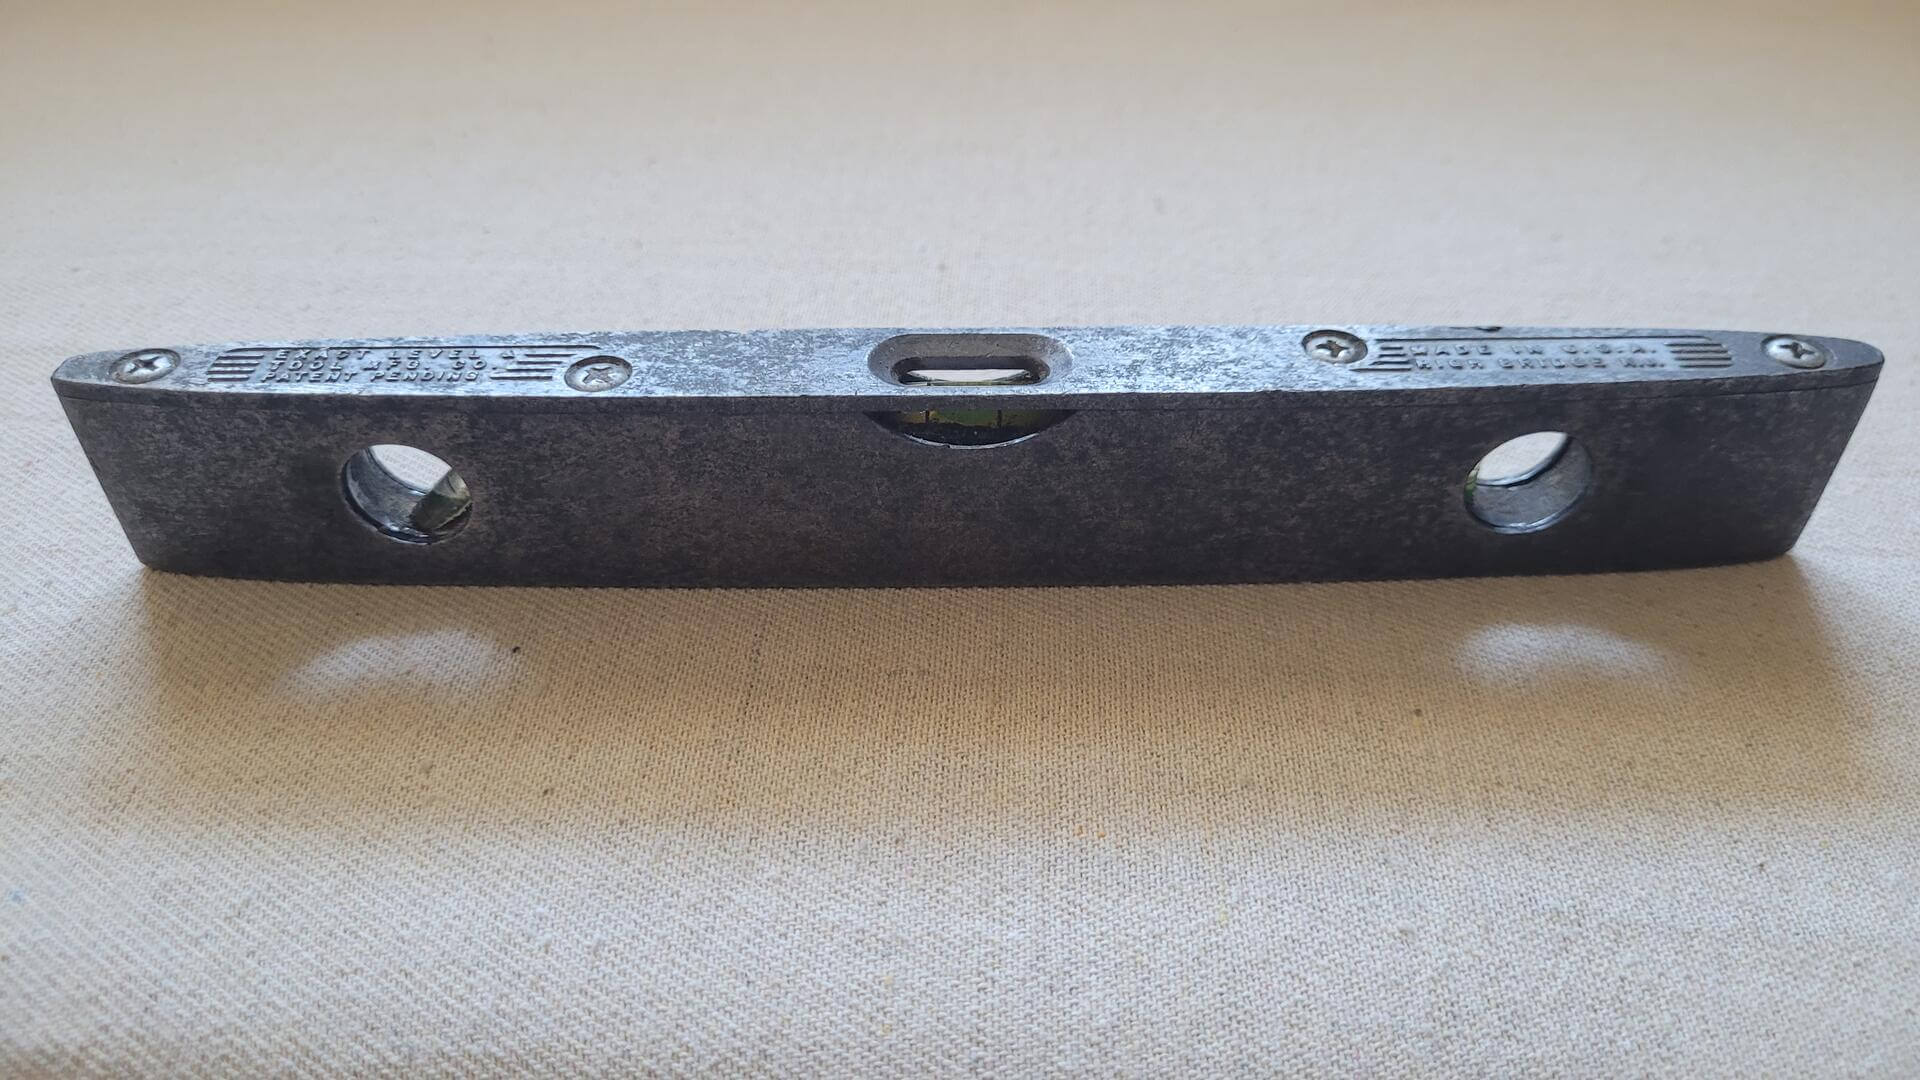 Antique cast aluminum torpedo level nince inches long by Exact Level & Tool Manufacturing Company from High Bridge NJ. Vintage made in USA collectible marking and measuring tools